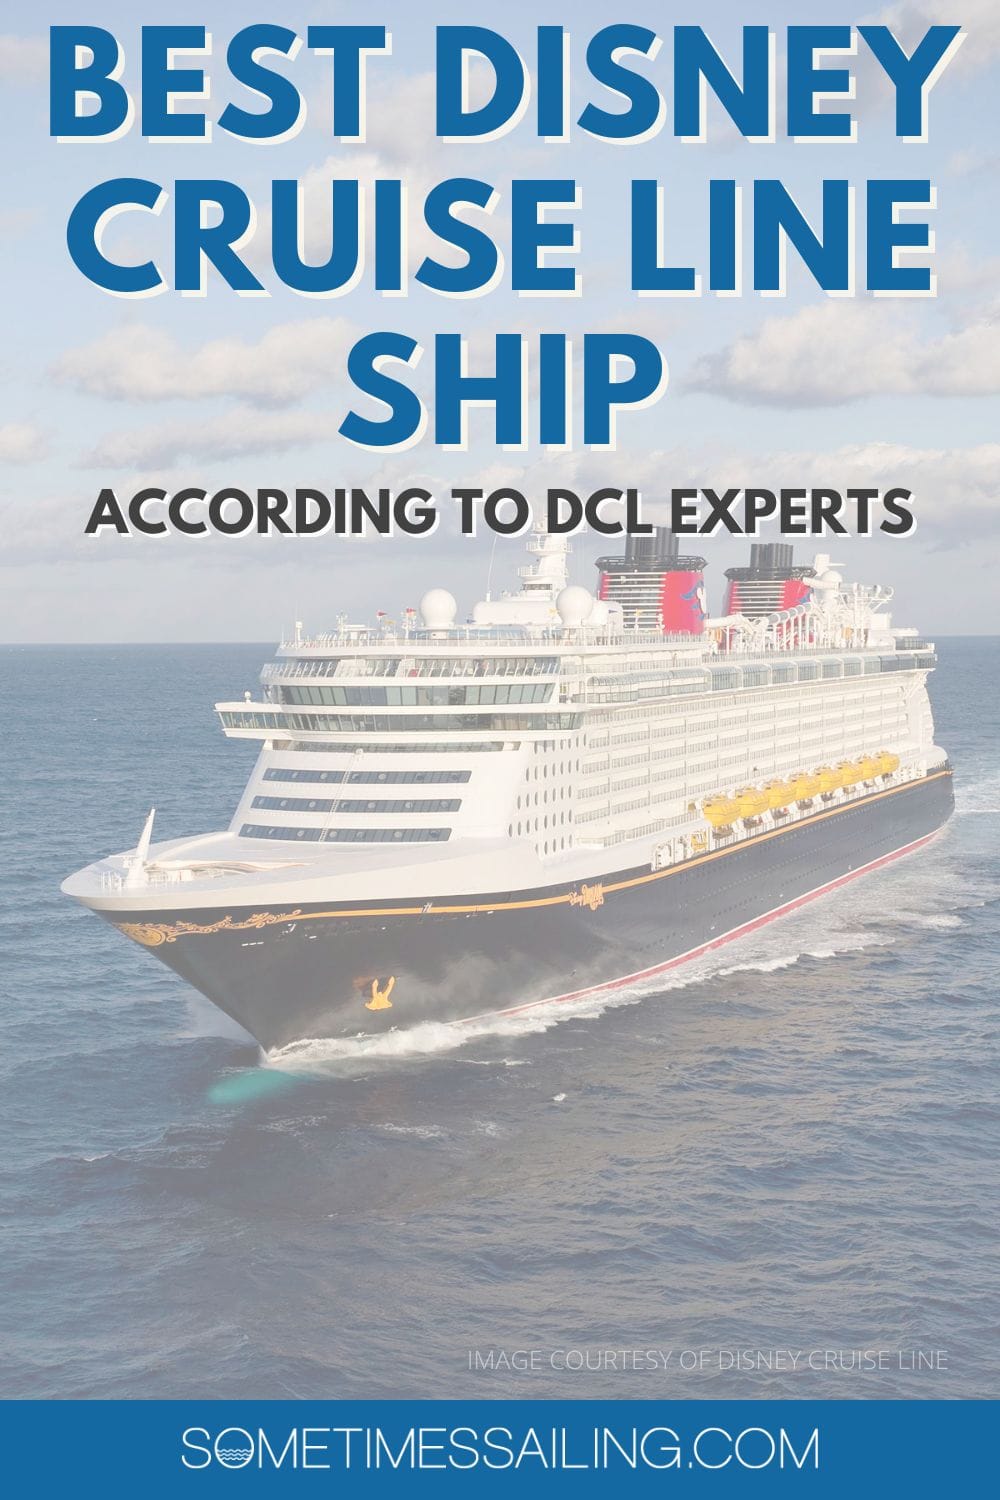 Best Disney Cruise Line Ship according to DCL experts with a faded aerial image of a Disney Cruise ship in the ocean.